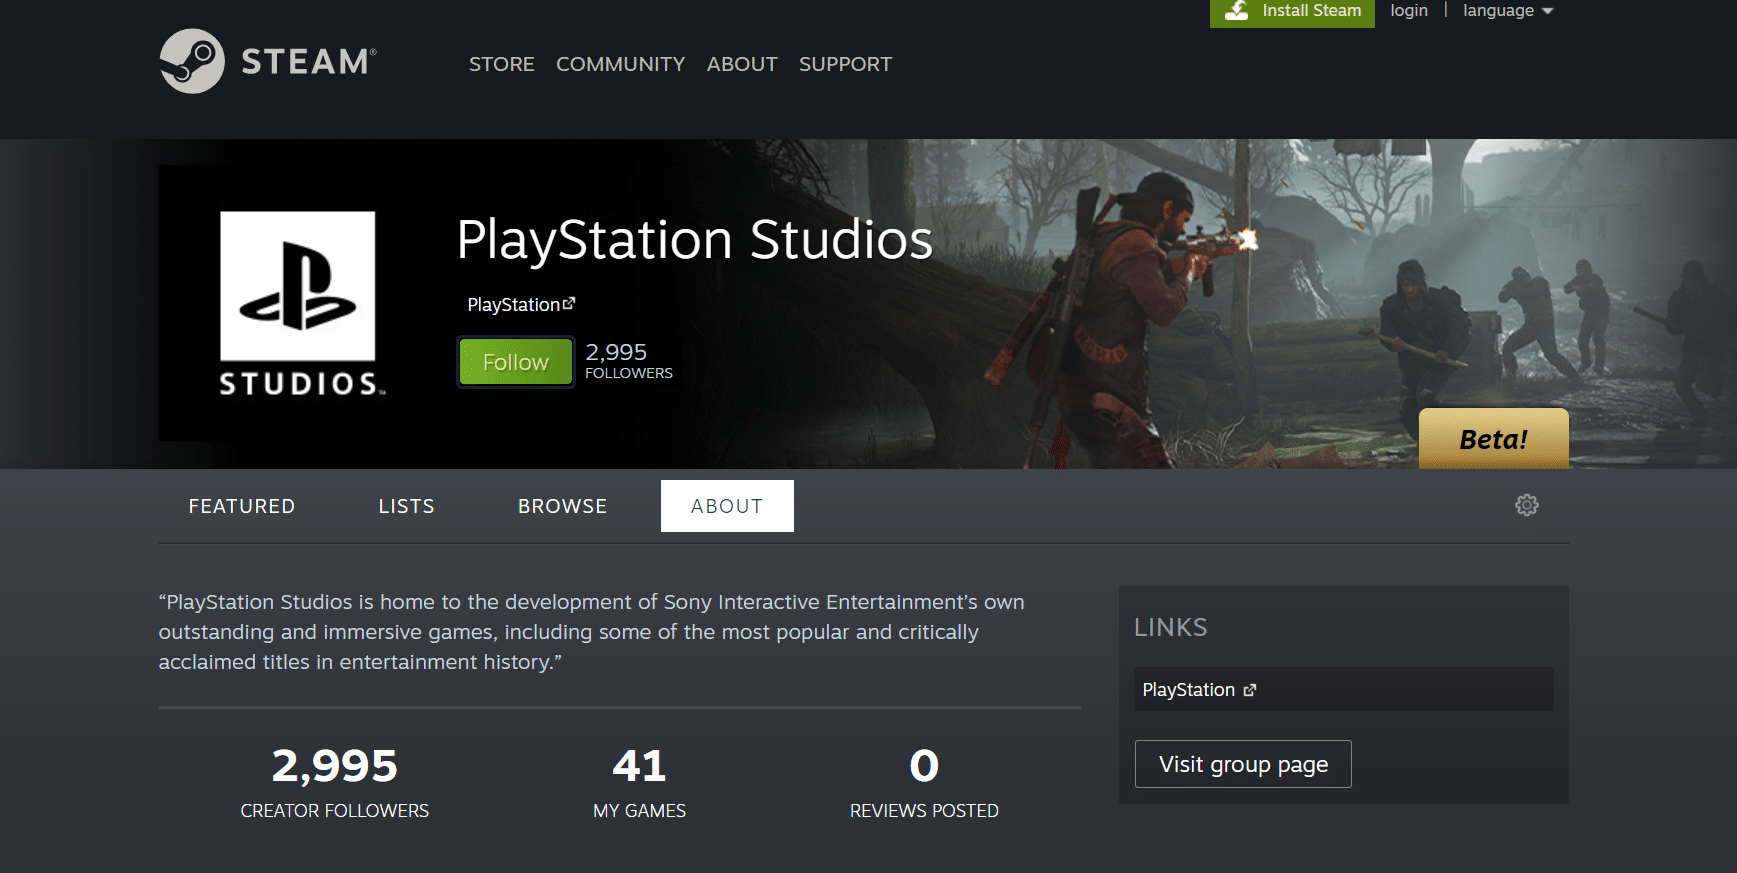 OC3D - PlayStation Studios Steam page points towards future PC releases.